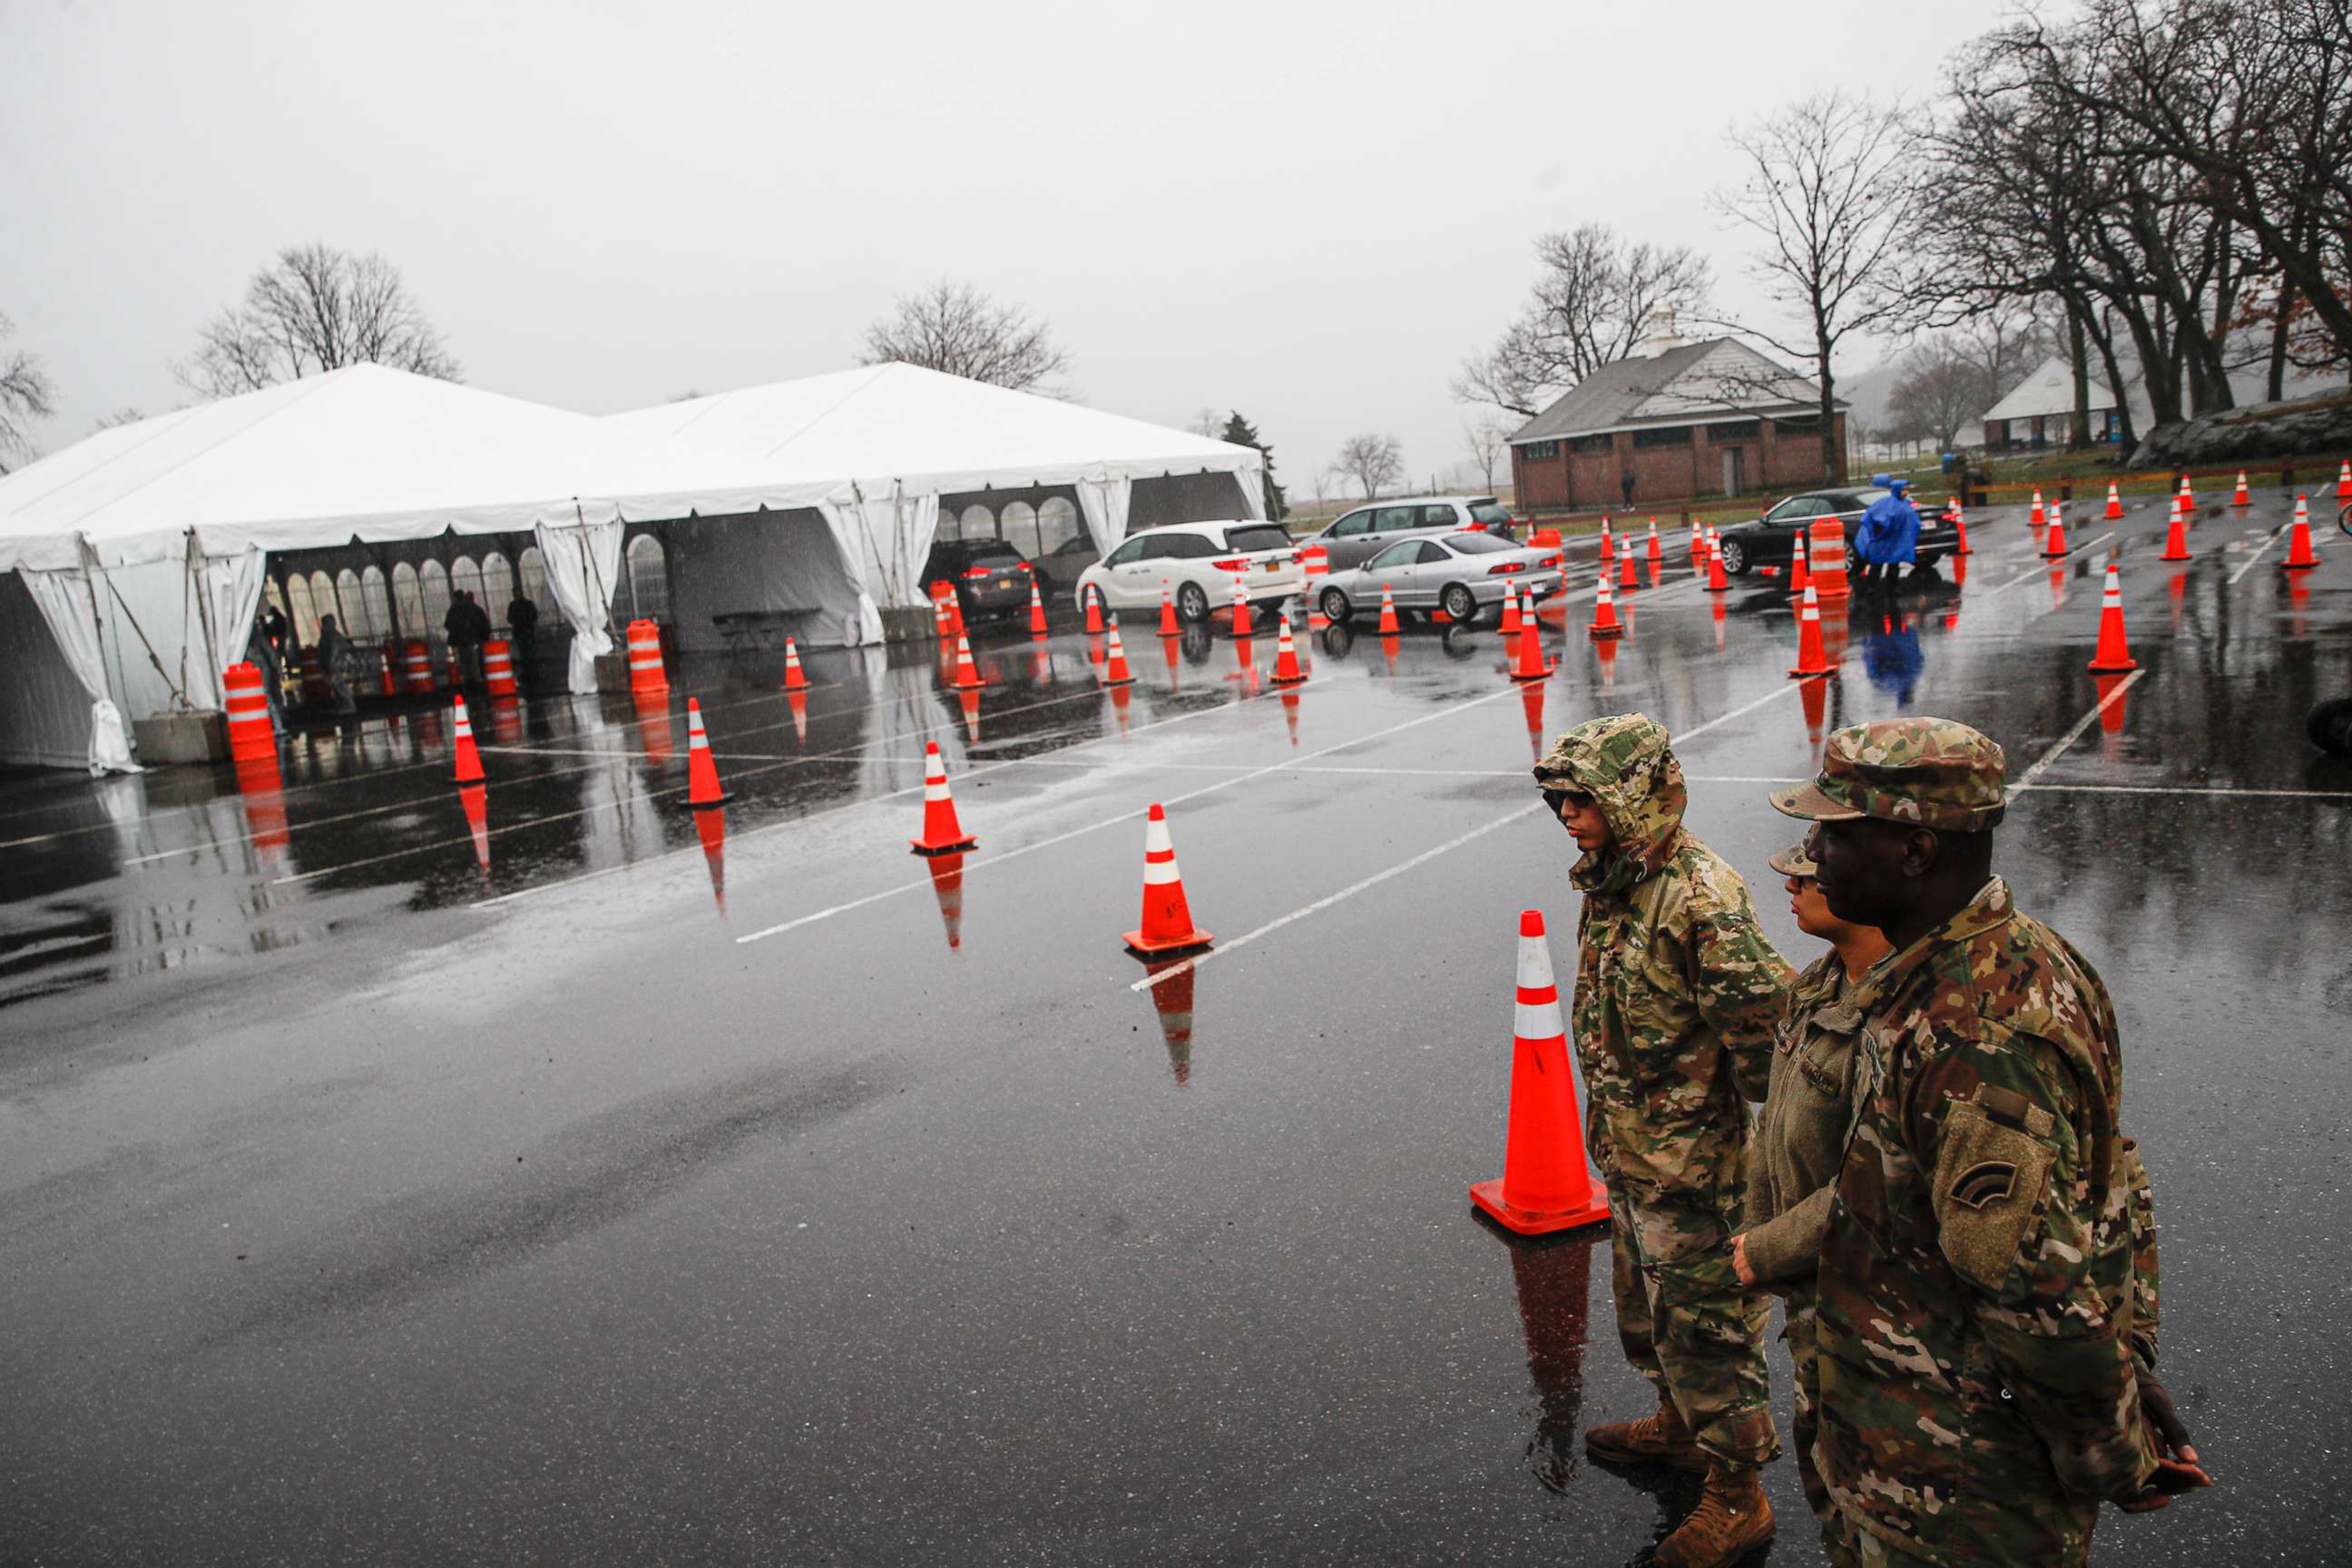 PHOTO: National Guard personnel stand beside a line of motorists waiting for COVID-19 infection testing at Glen Island Park in New Rochelle, New York, on March 13, 2020.